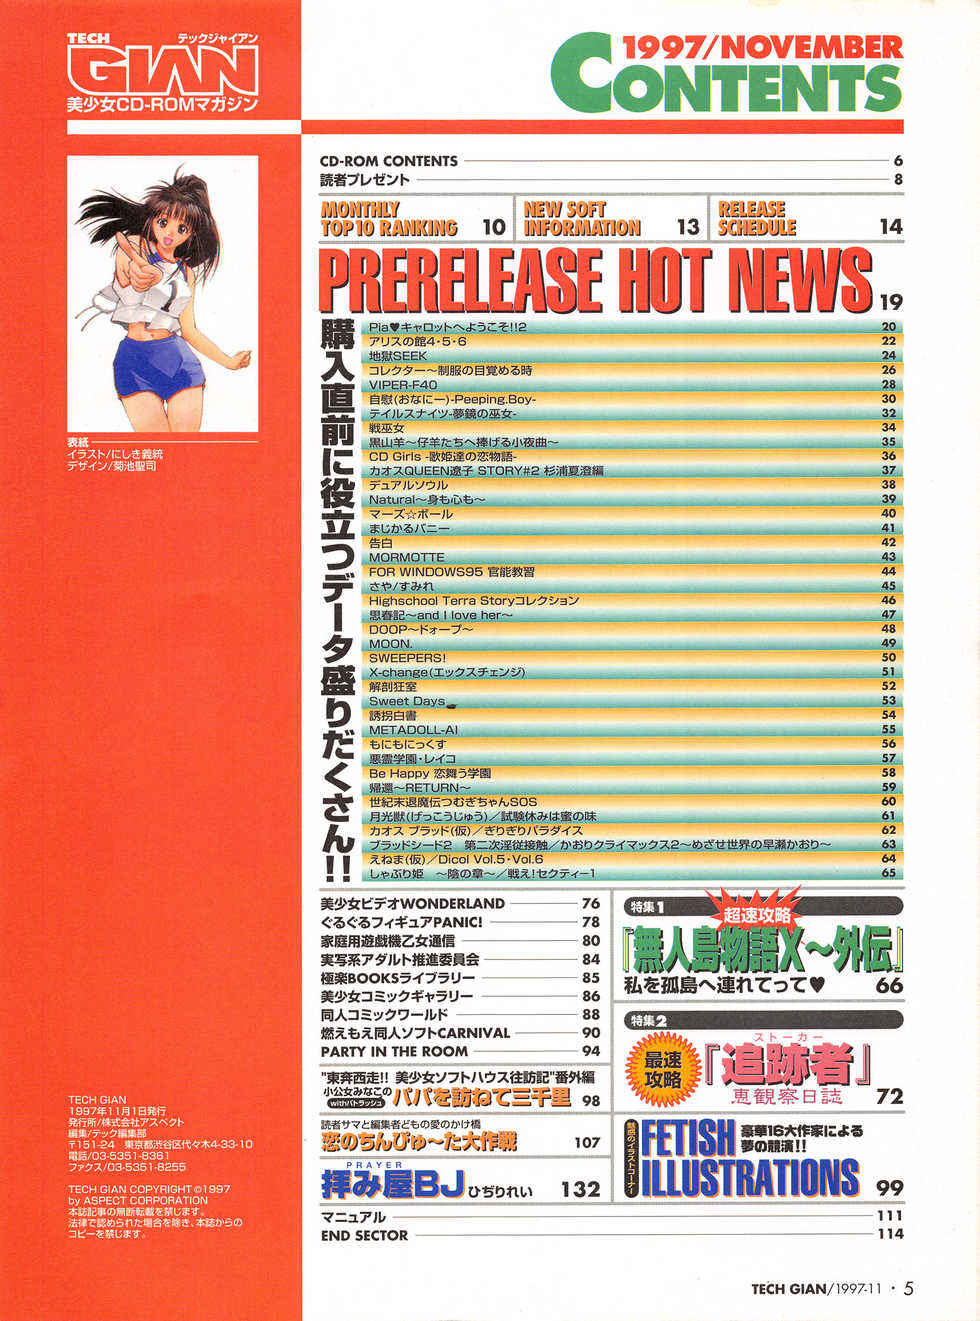 Tech Gian Issue 13 (November 1997) - Page 3